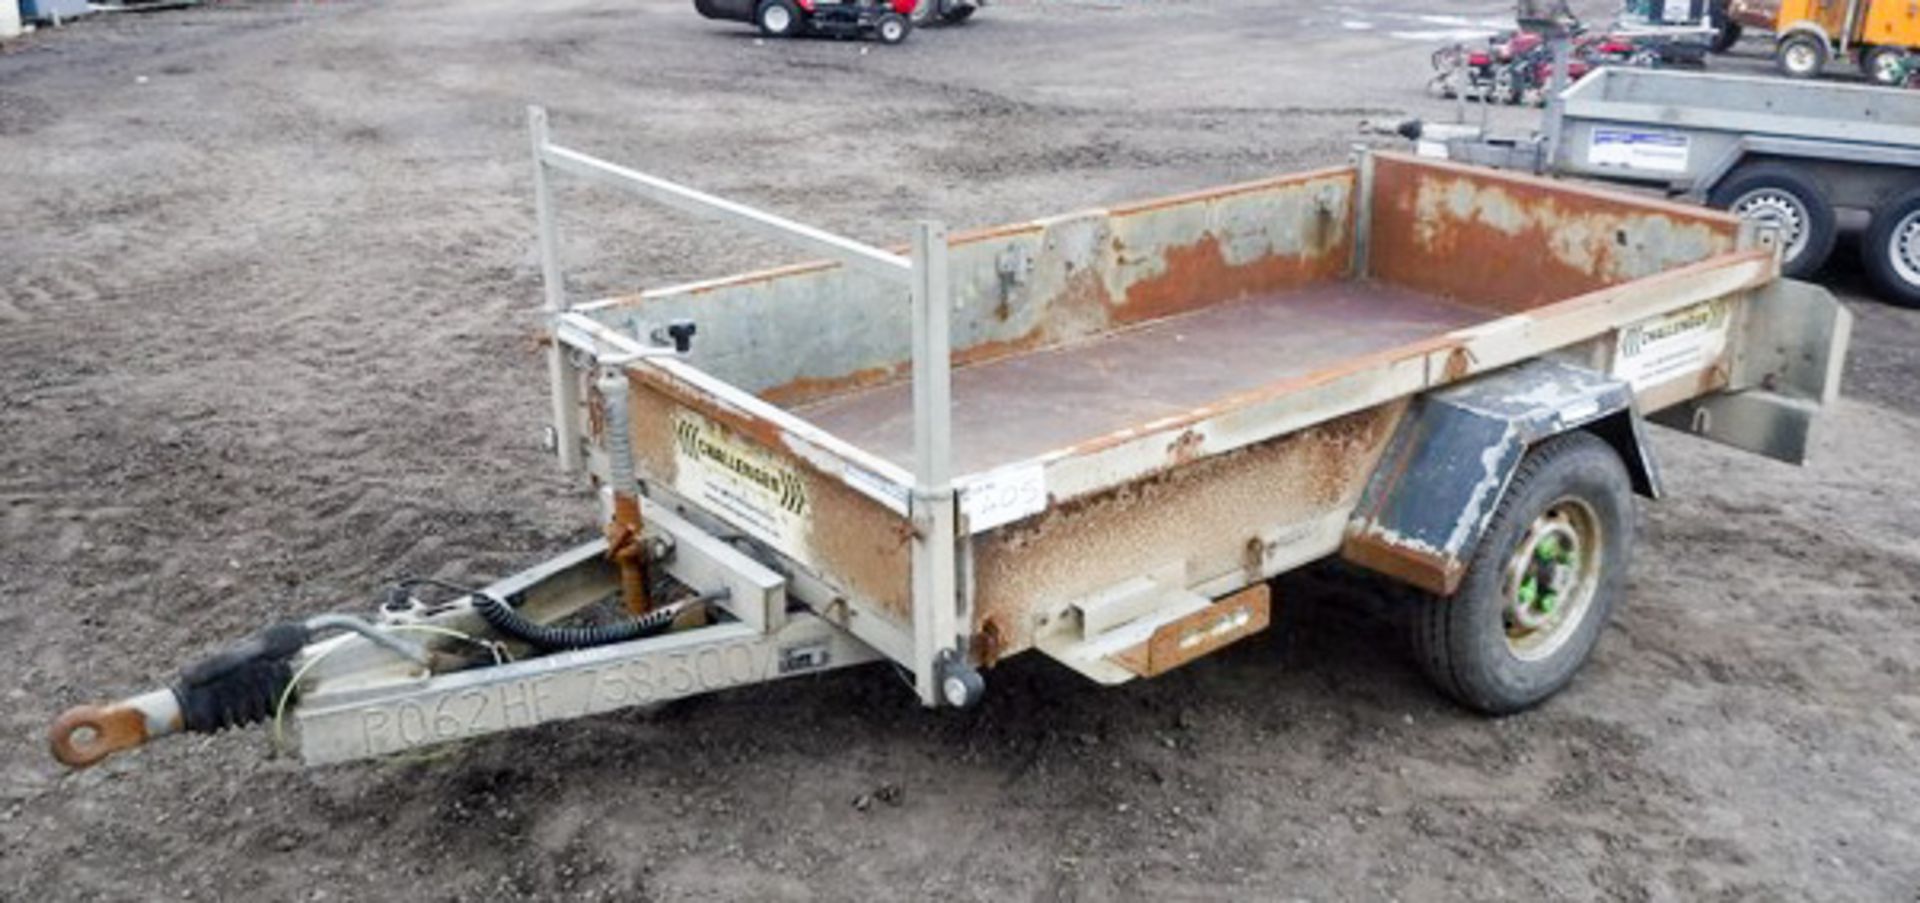 INDESPENSION CHALLENGER 8' X 4' single axle trailer, s/n G064807. Asset no 758-3007.